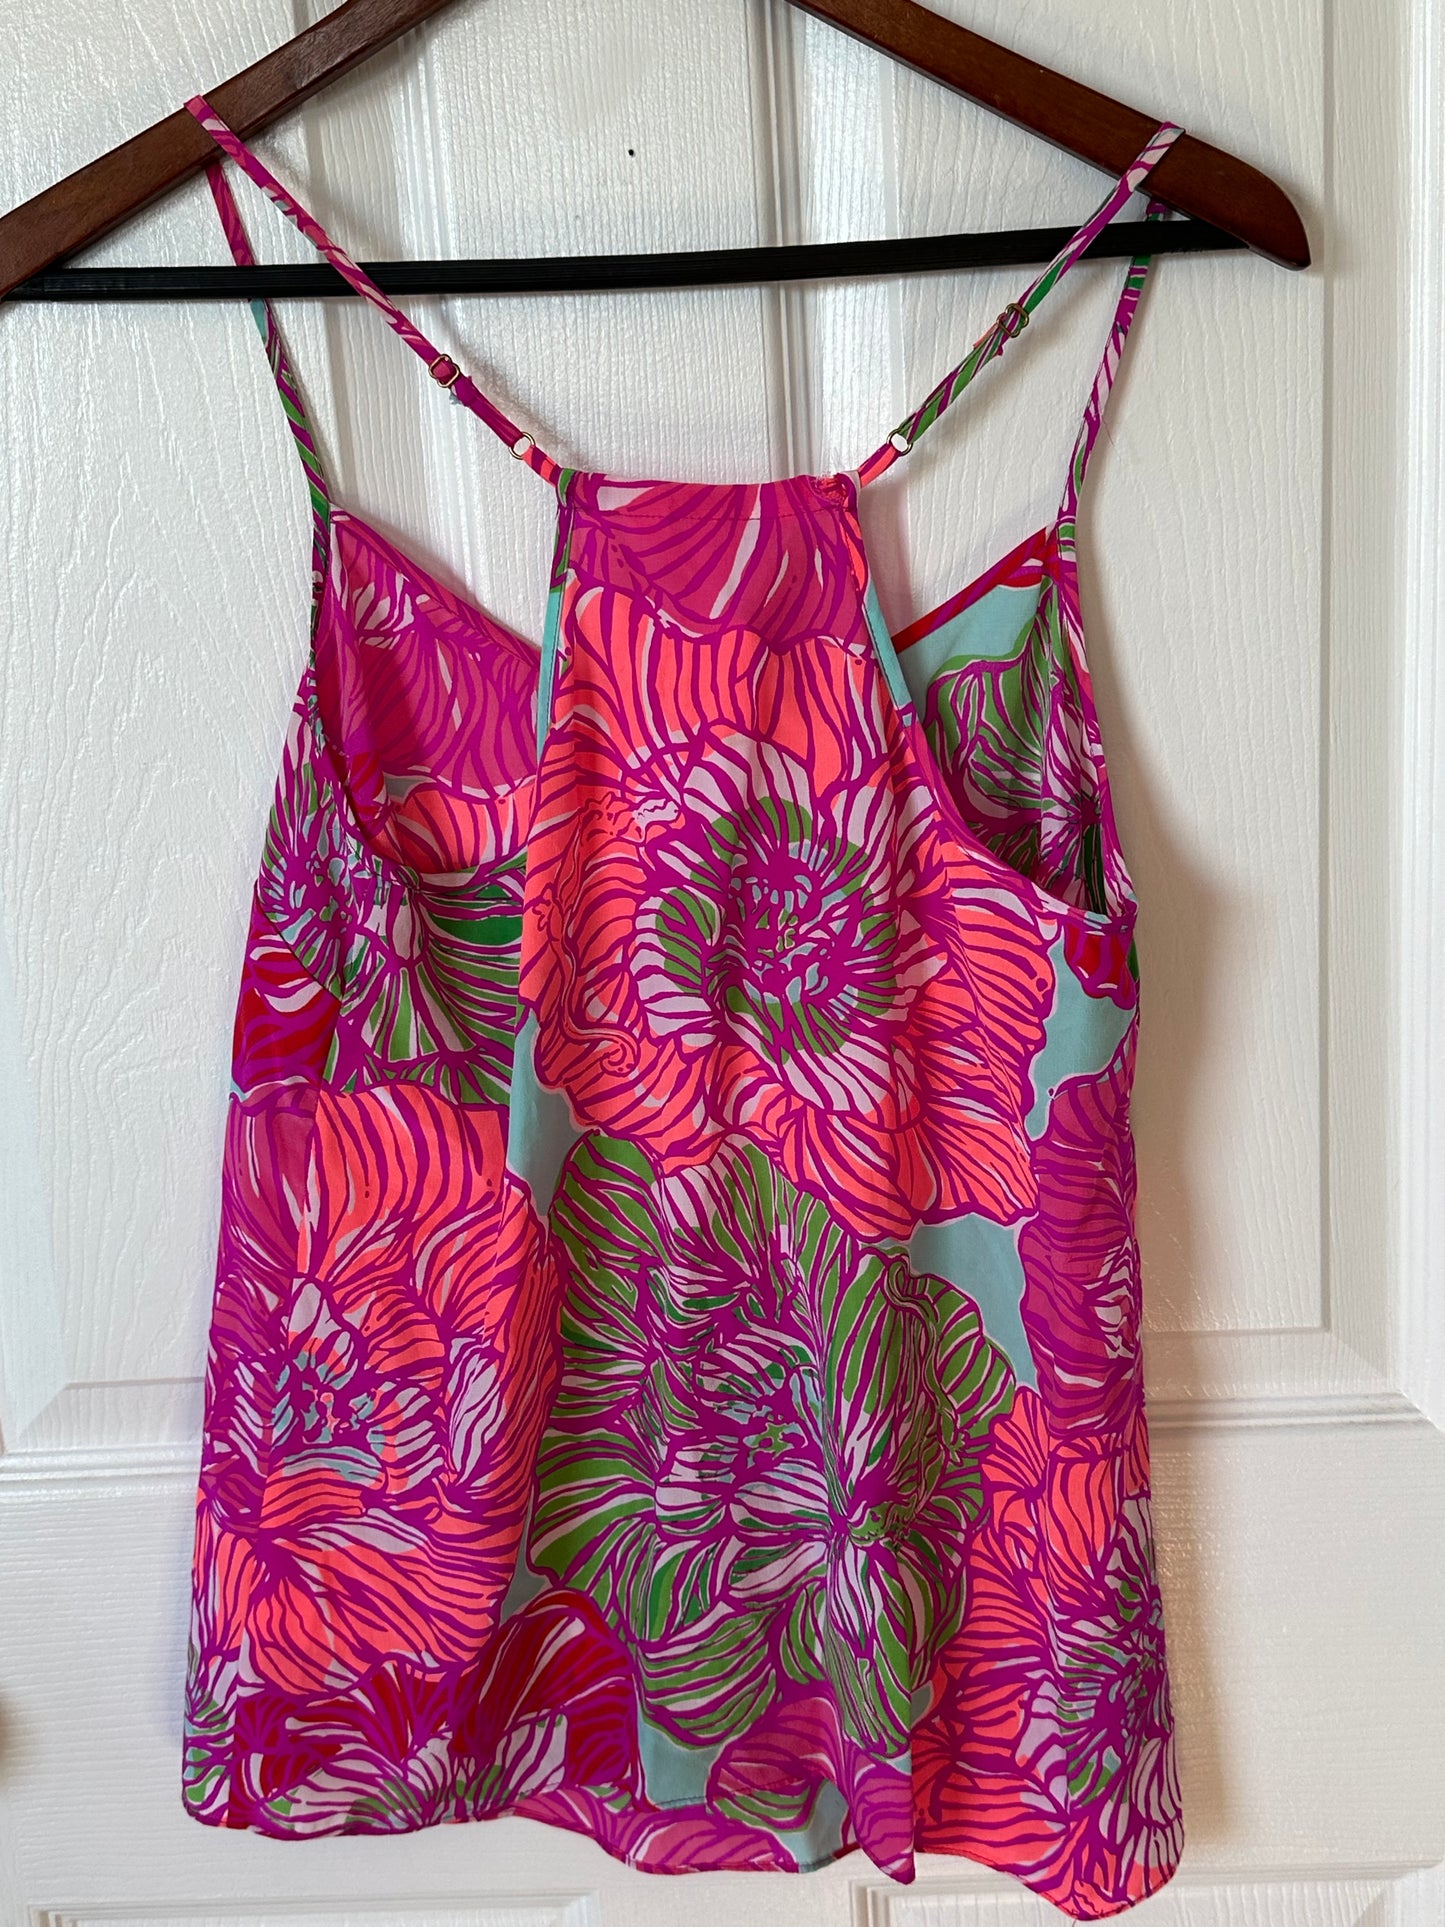 Lilly Pulitzer Women’s Halter Tank Top Sz Small Pink